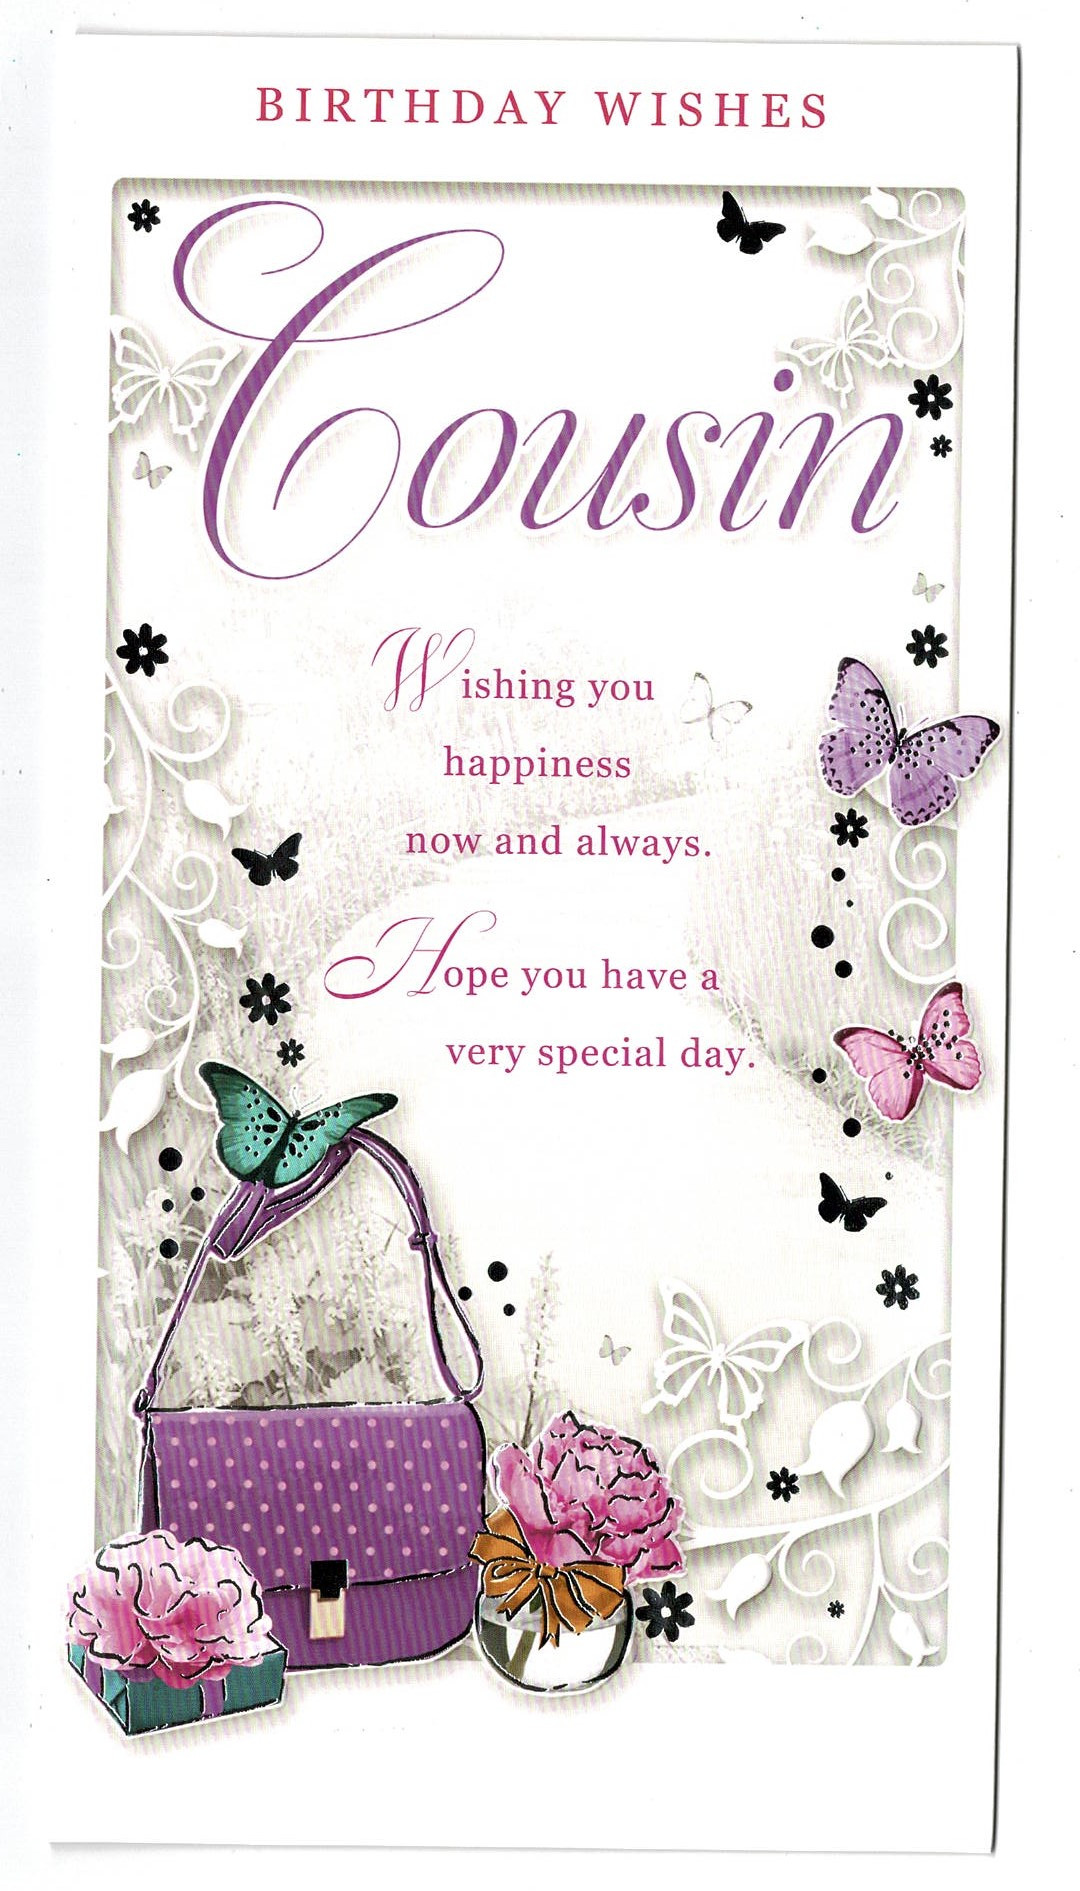 Birthday Card For Cousin
 Cousin Birthday Card Embossed With Sentiment Verse With